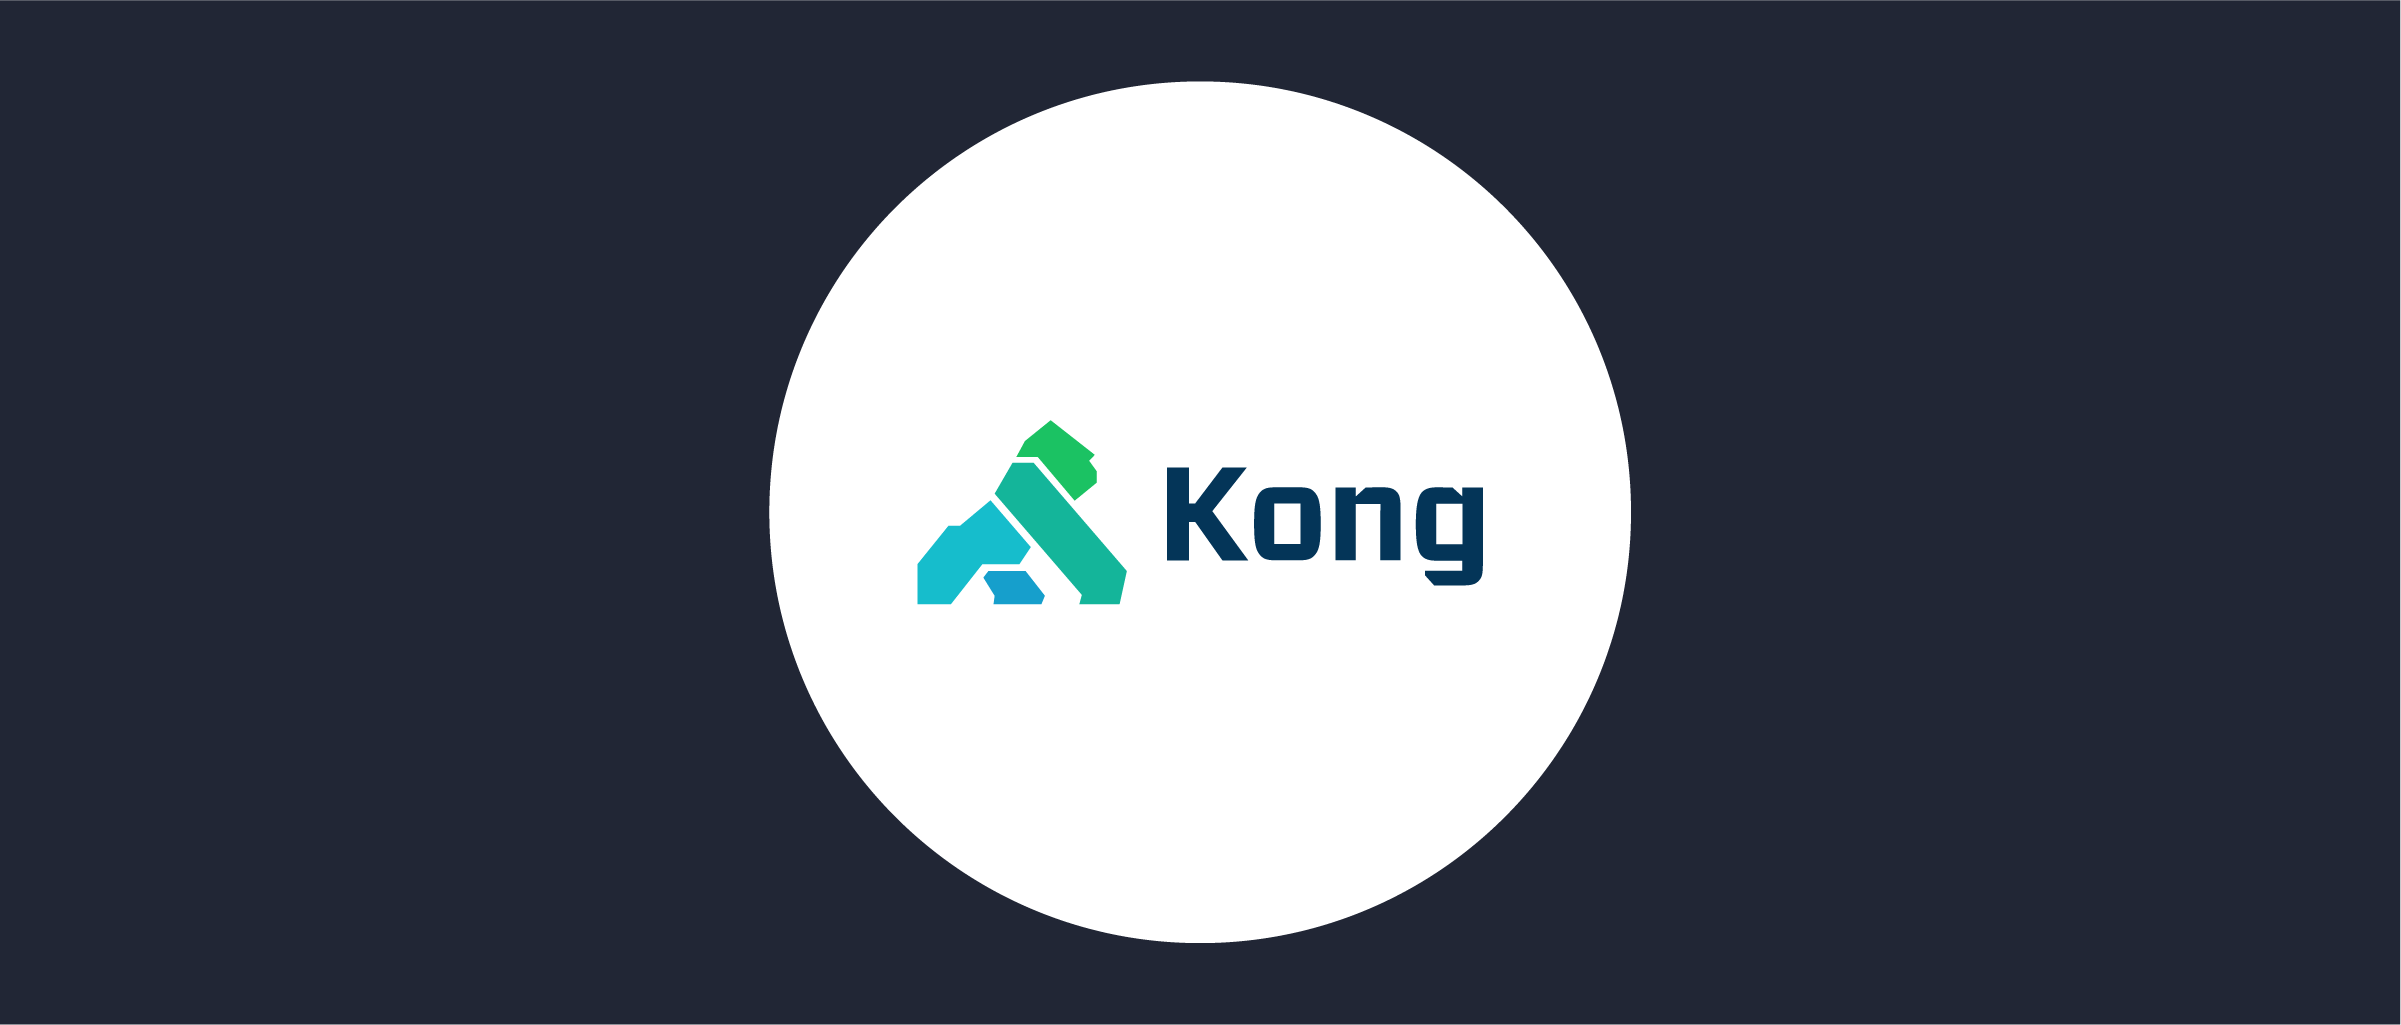 Integrating with Kong Open Source